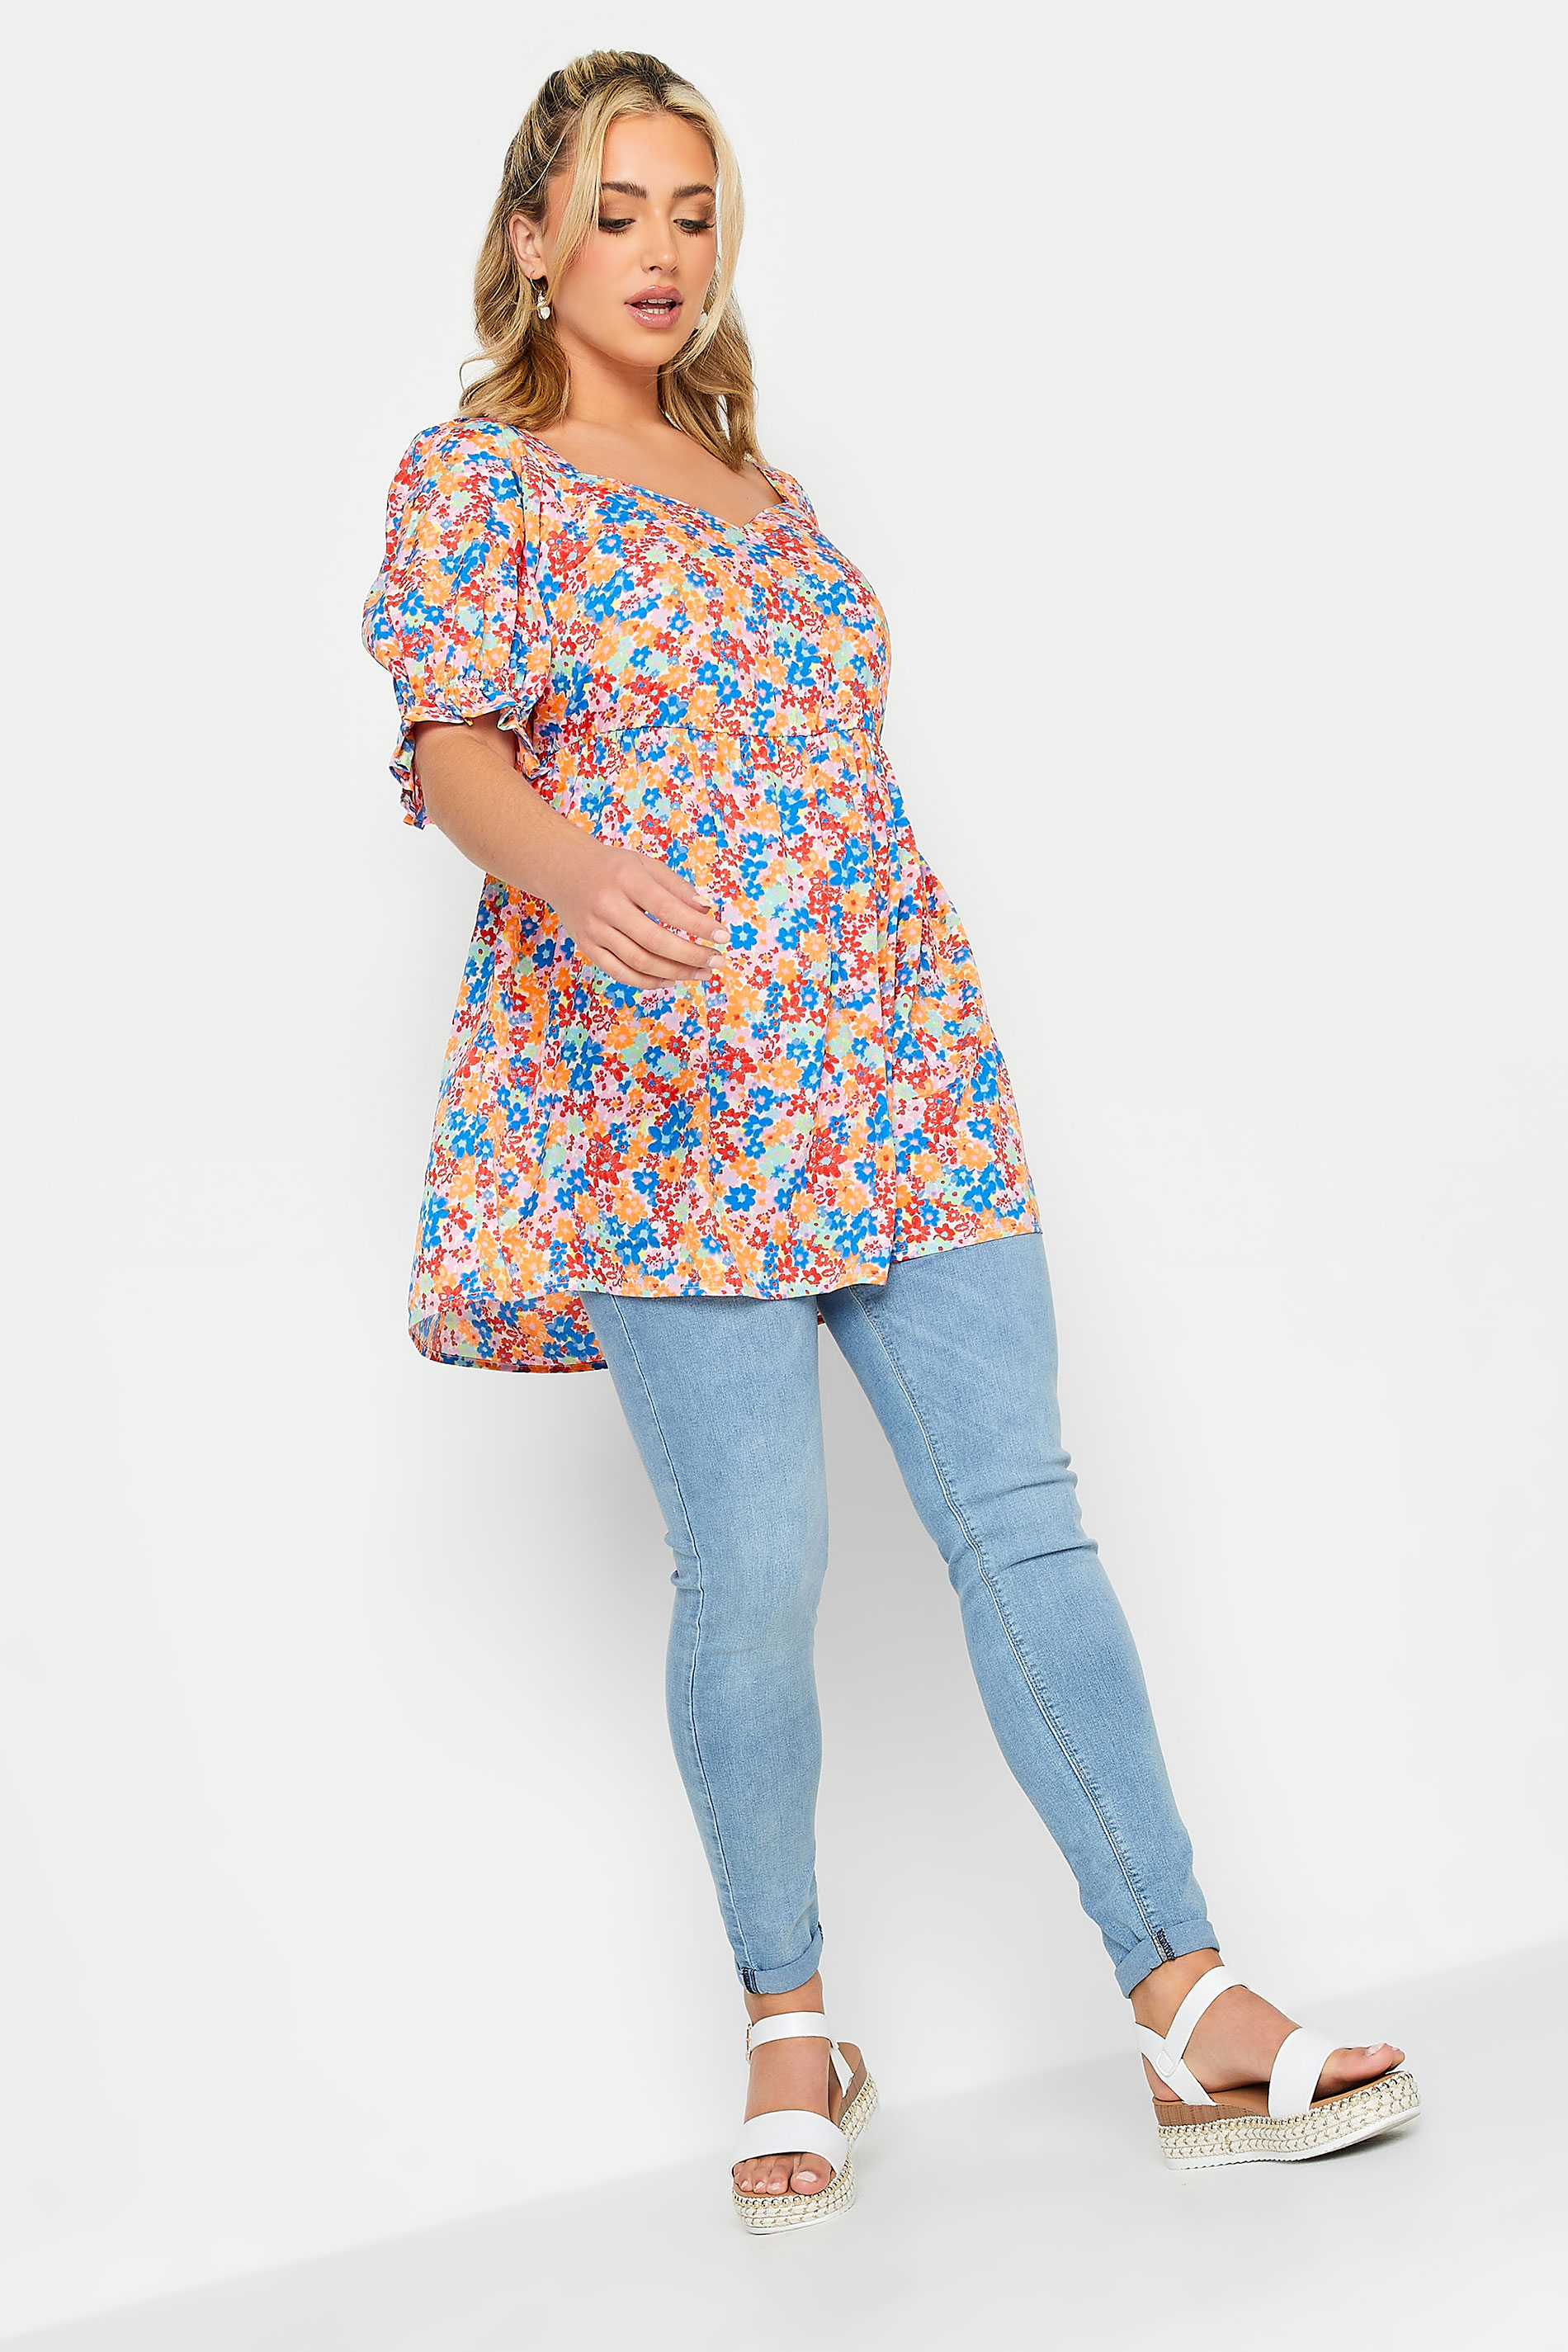 YOURS Orange Plus Size Floral Peplum Top | Yours Clothing  3